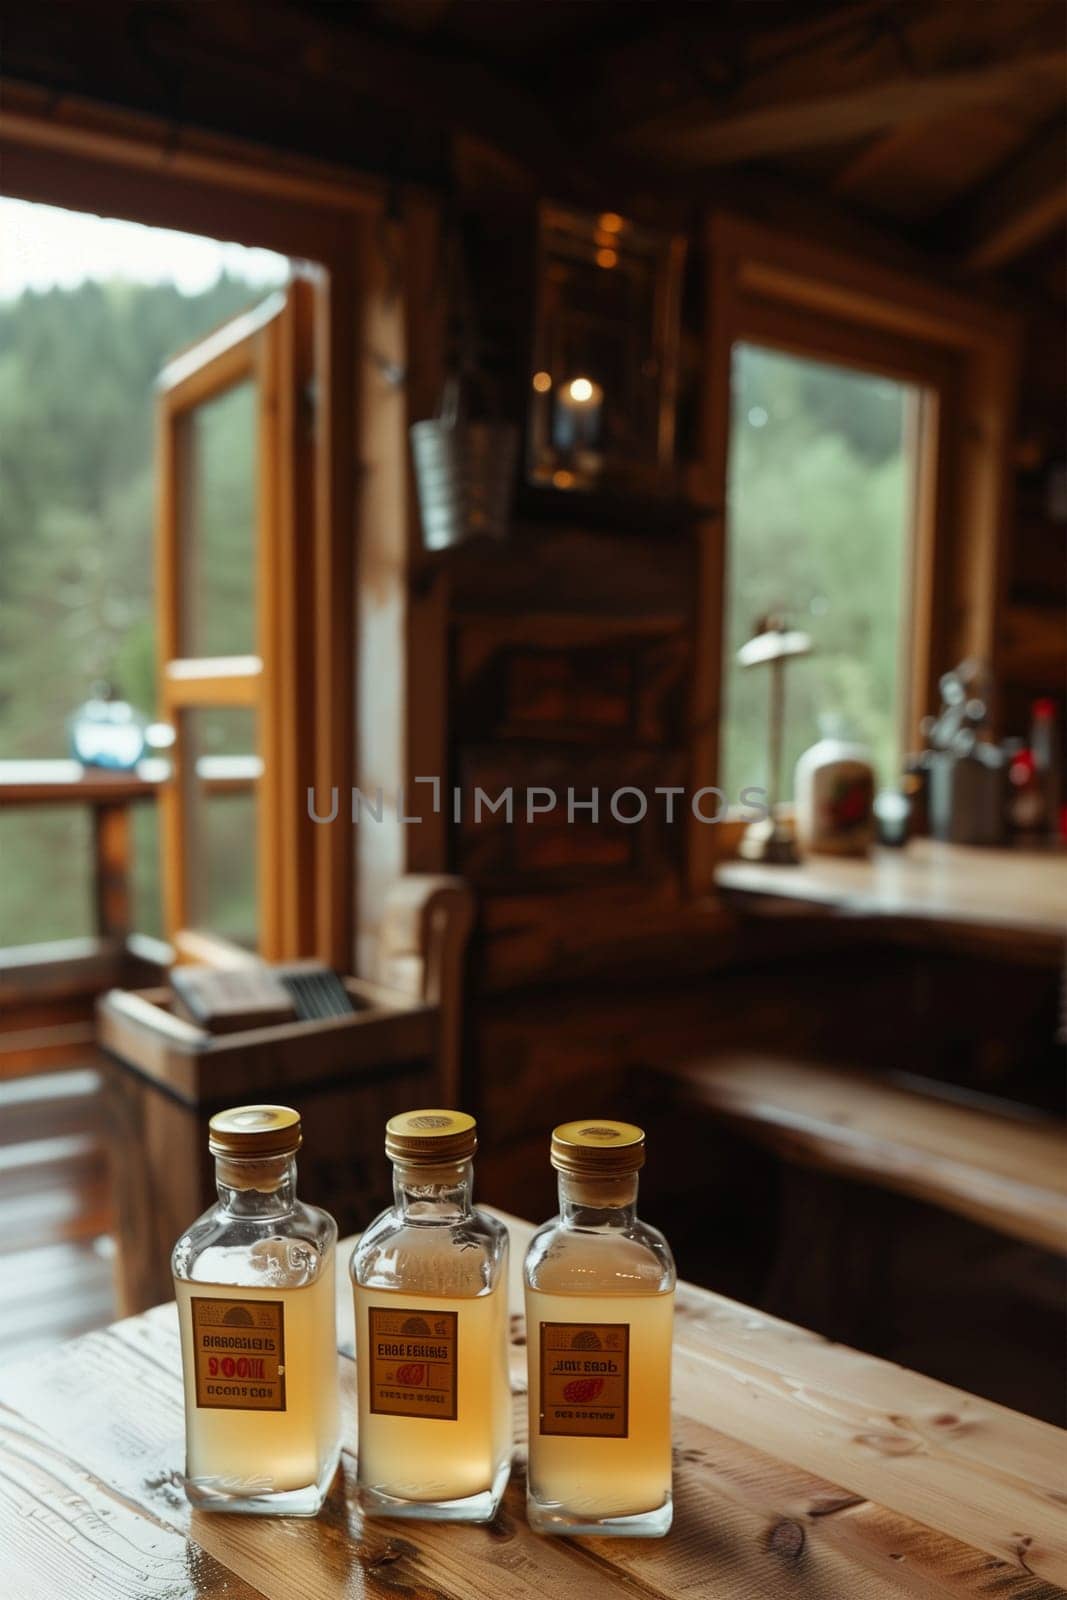 Three assorted bottles filled with liquid are placed on a rustic wooden table.